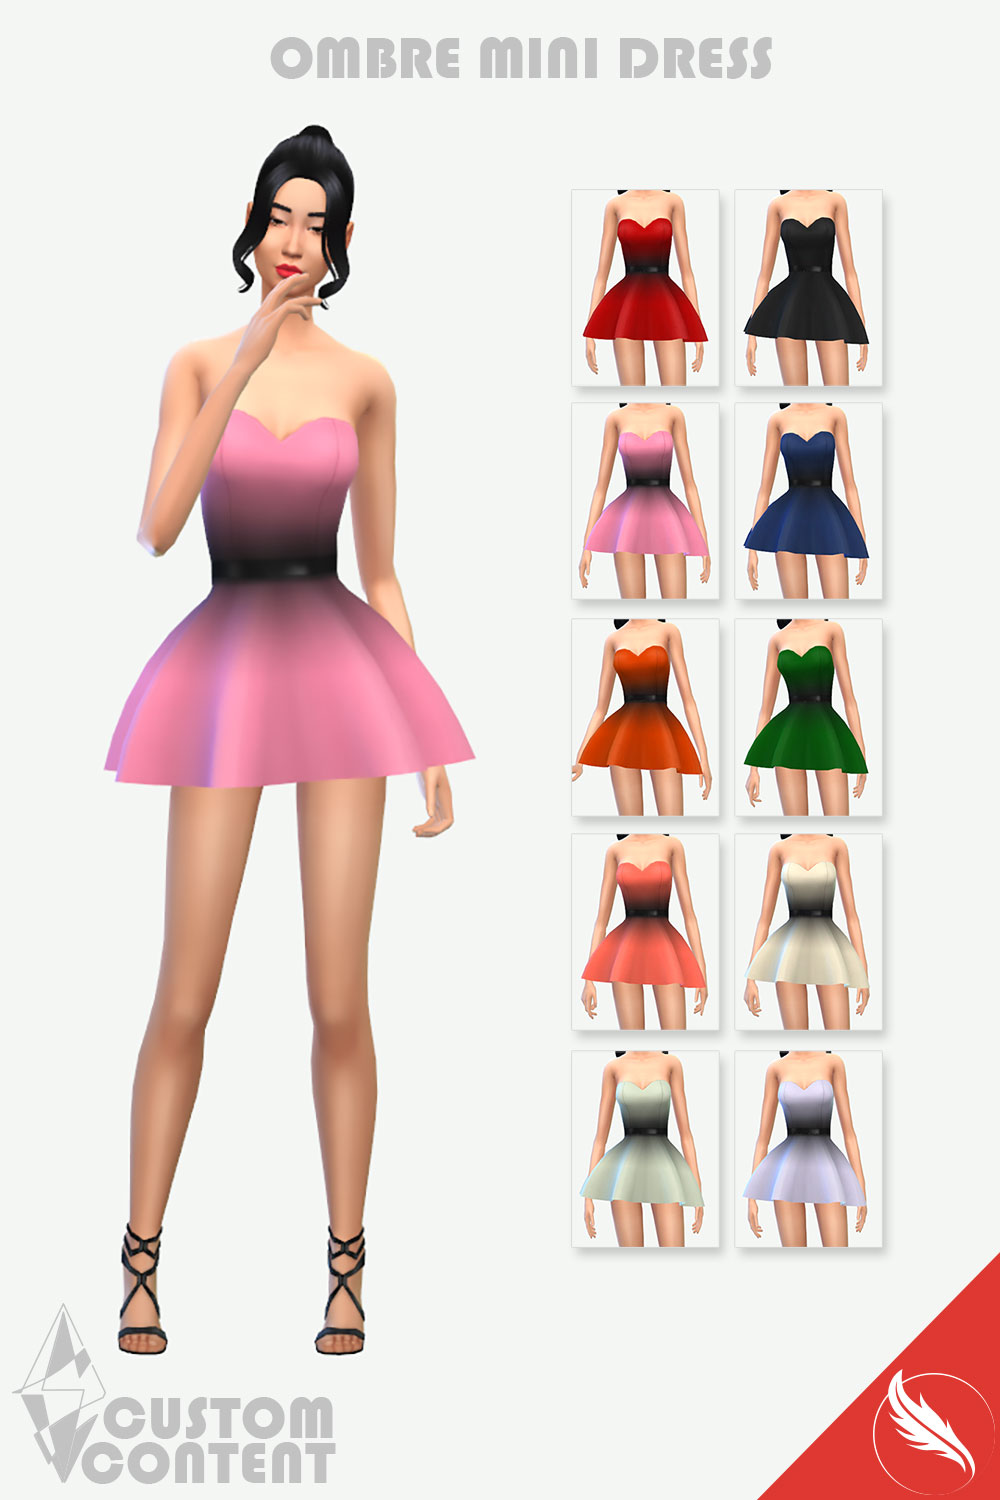 The Sims 4 Ombre Strapless Mini Dress